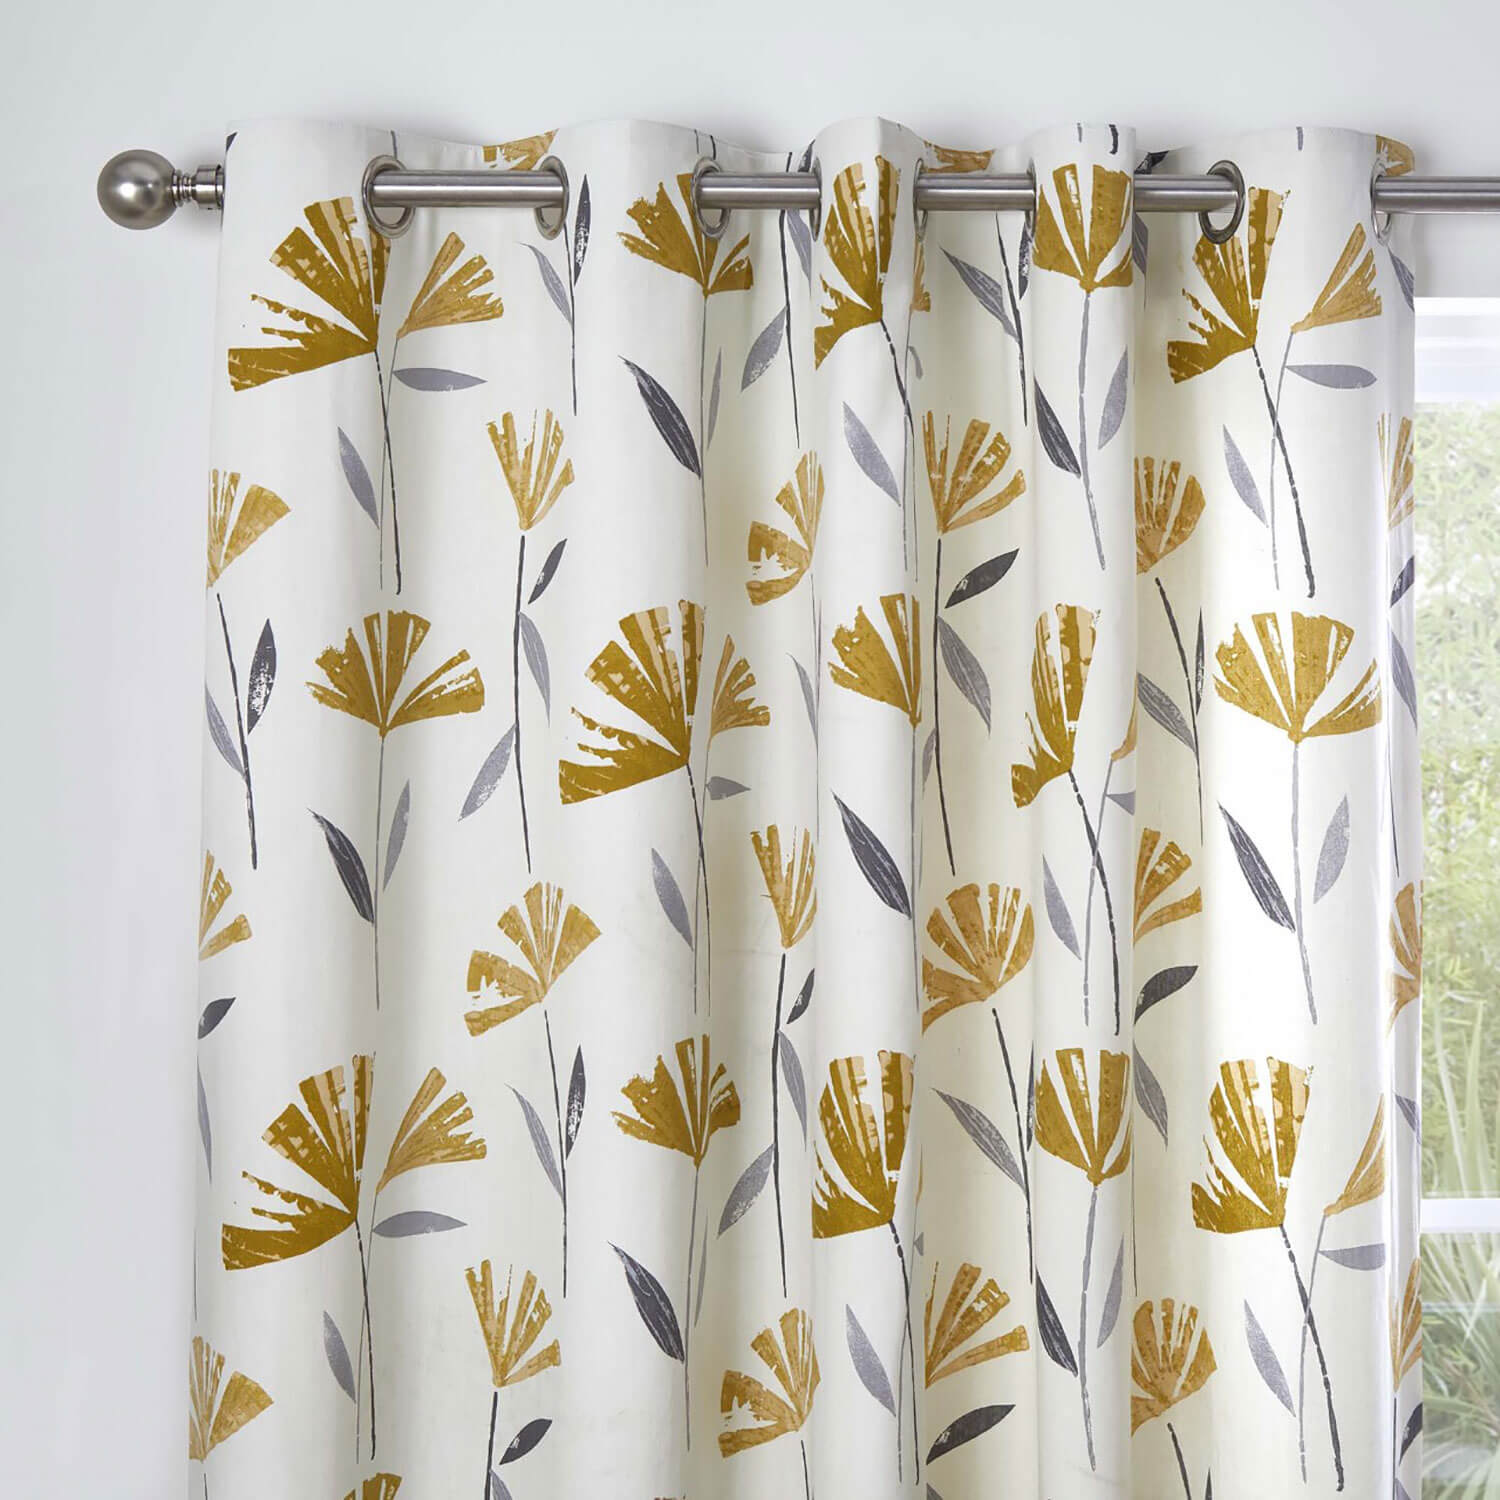 The Home Bedroom Dacey Eyelet Curtains - Ochre 2 Shaws Department Stores